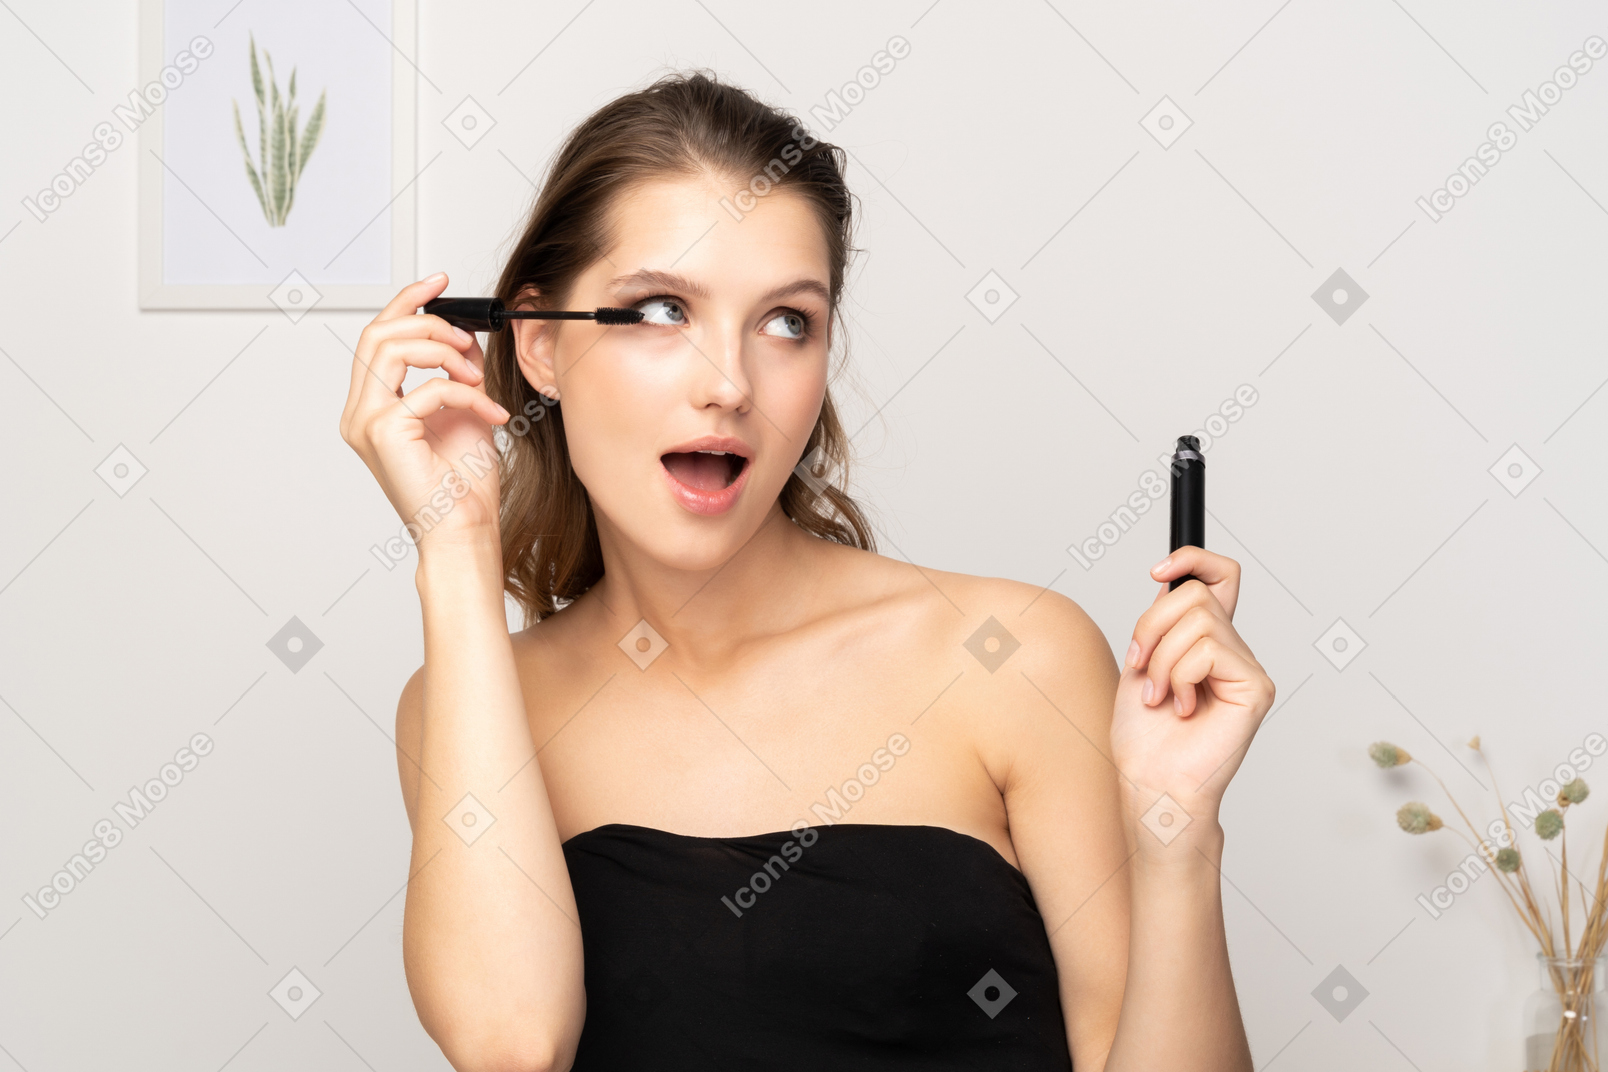 Front view of a surprised young woman wearing black top applying mascara